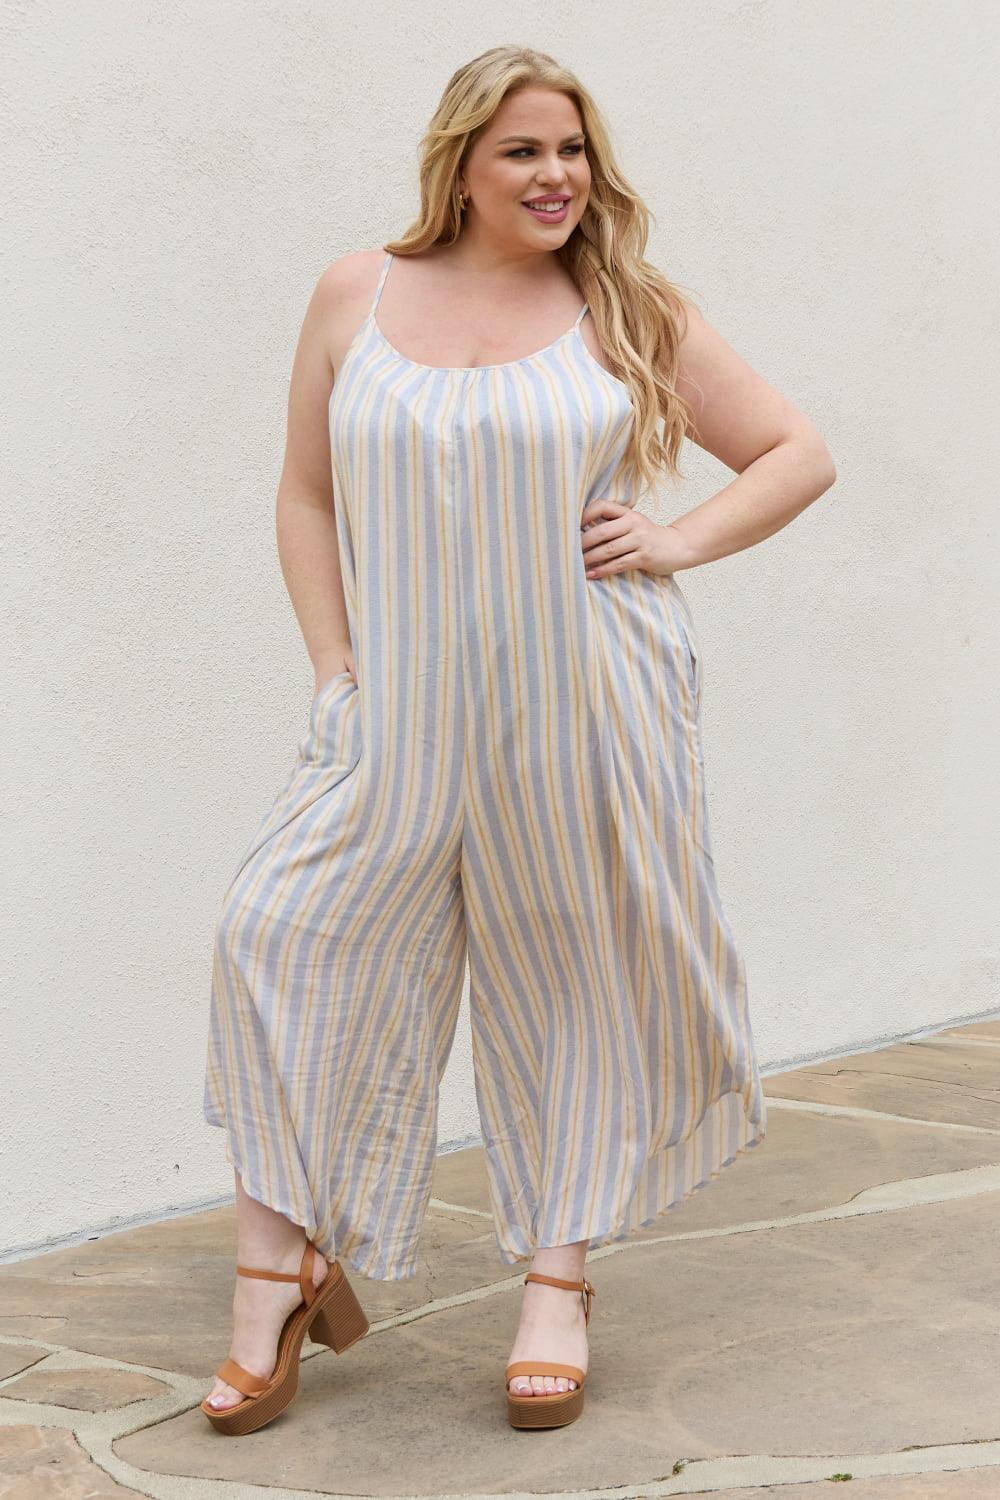 HEYSON Full Size Multi Colored Striped Jumpsuit with Pockets - The Fiery Jasmine